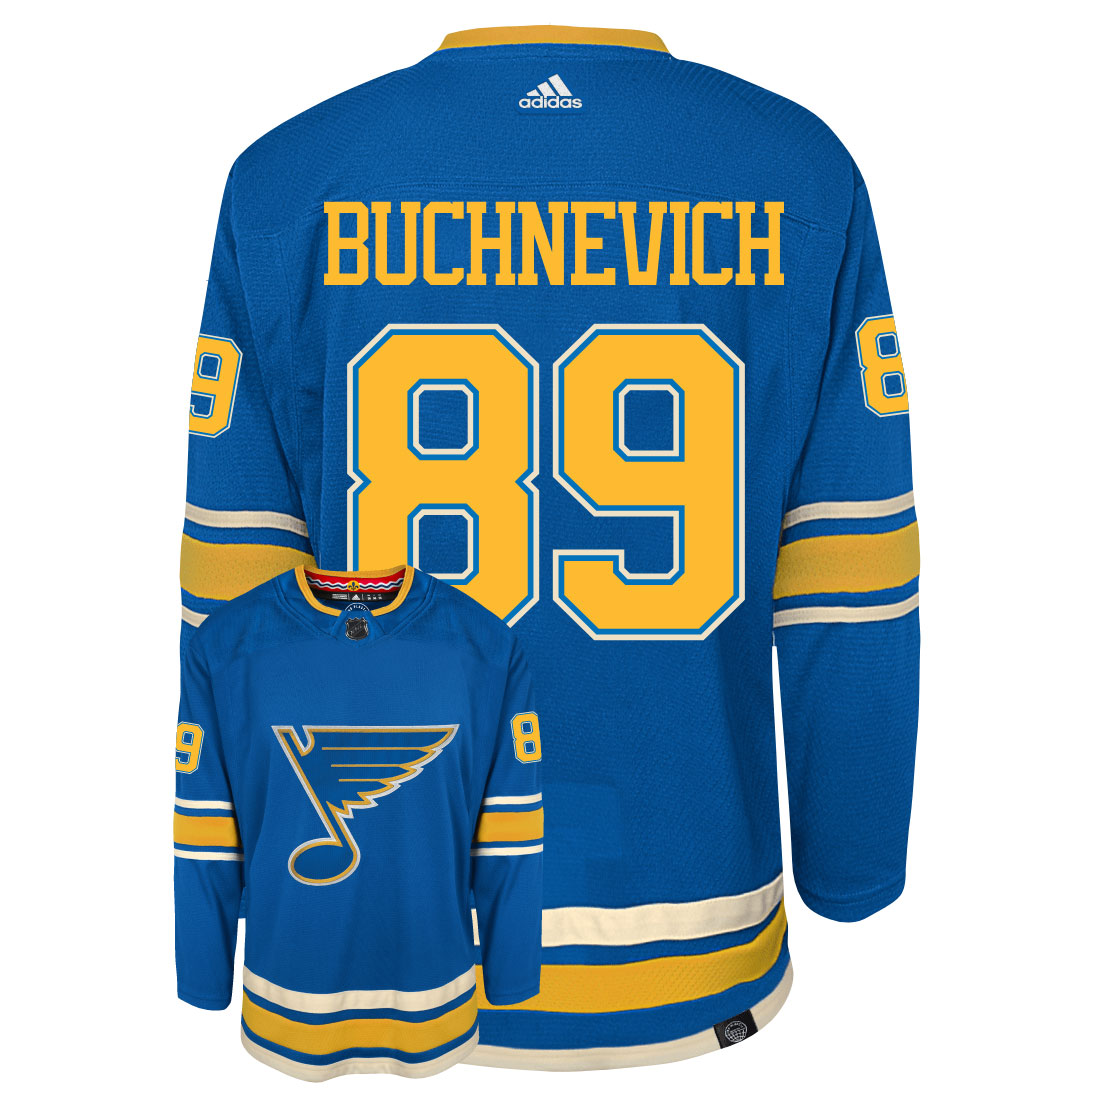 Pavel Buchnevich St Louis Blues Adidas Primegreen Authentic Third Alternate NHL Hockey Jersey - Back/Front View